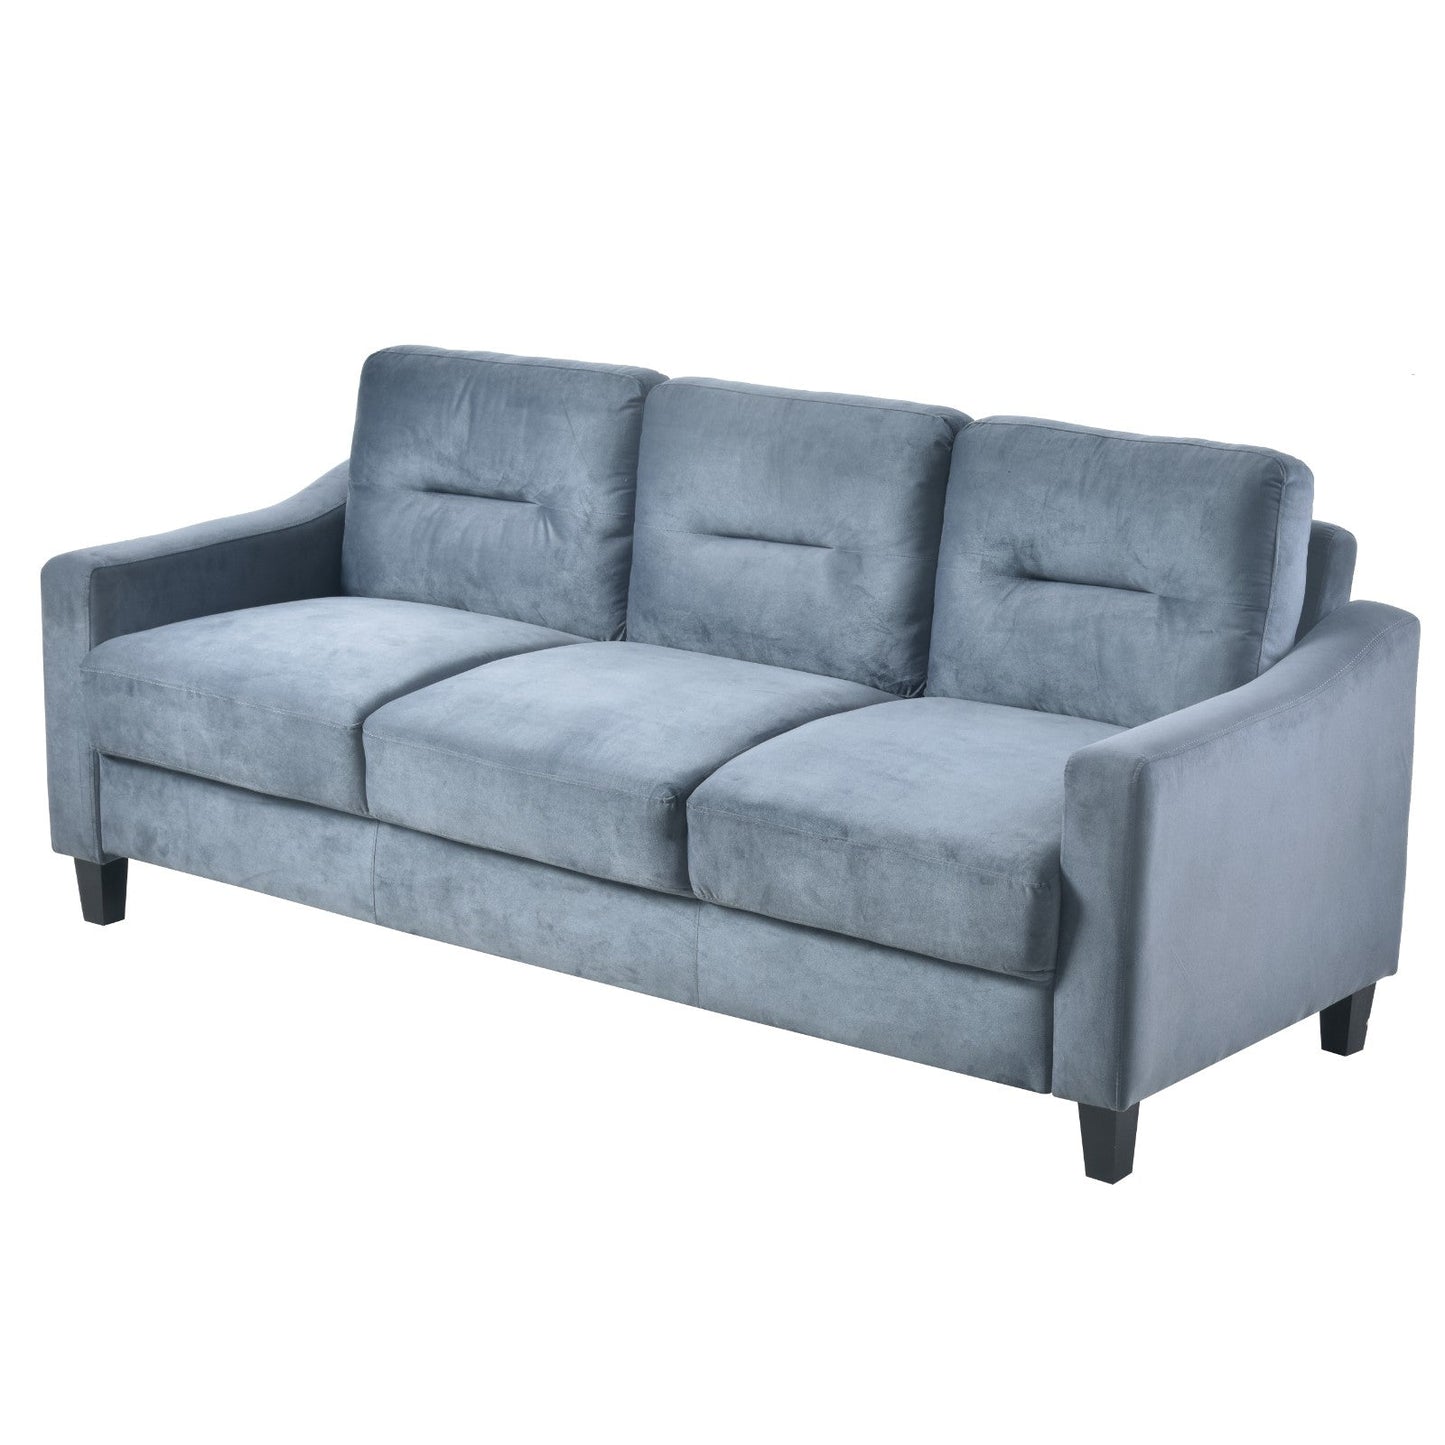 Comfortable Sectional Couches and Sofas for Living Room, Bedroom, Office, and Small Spaces